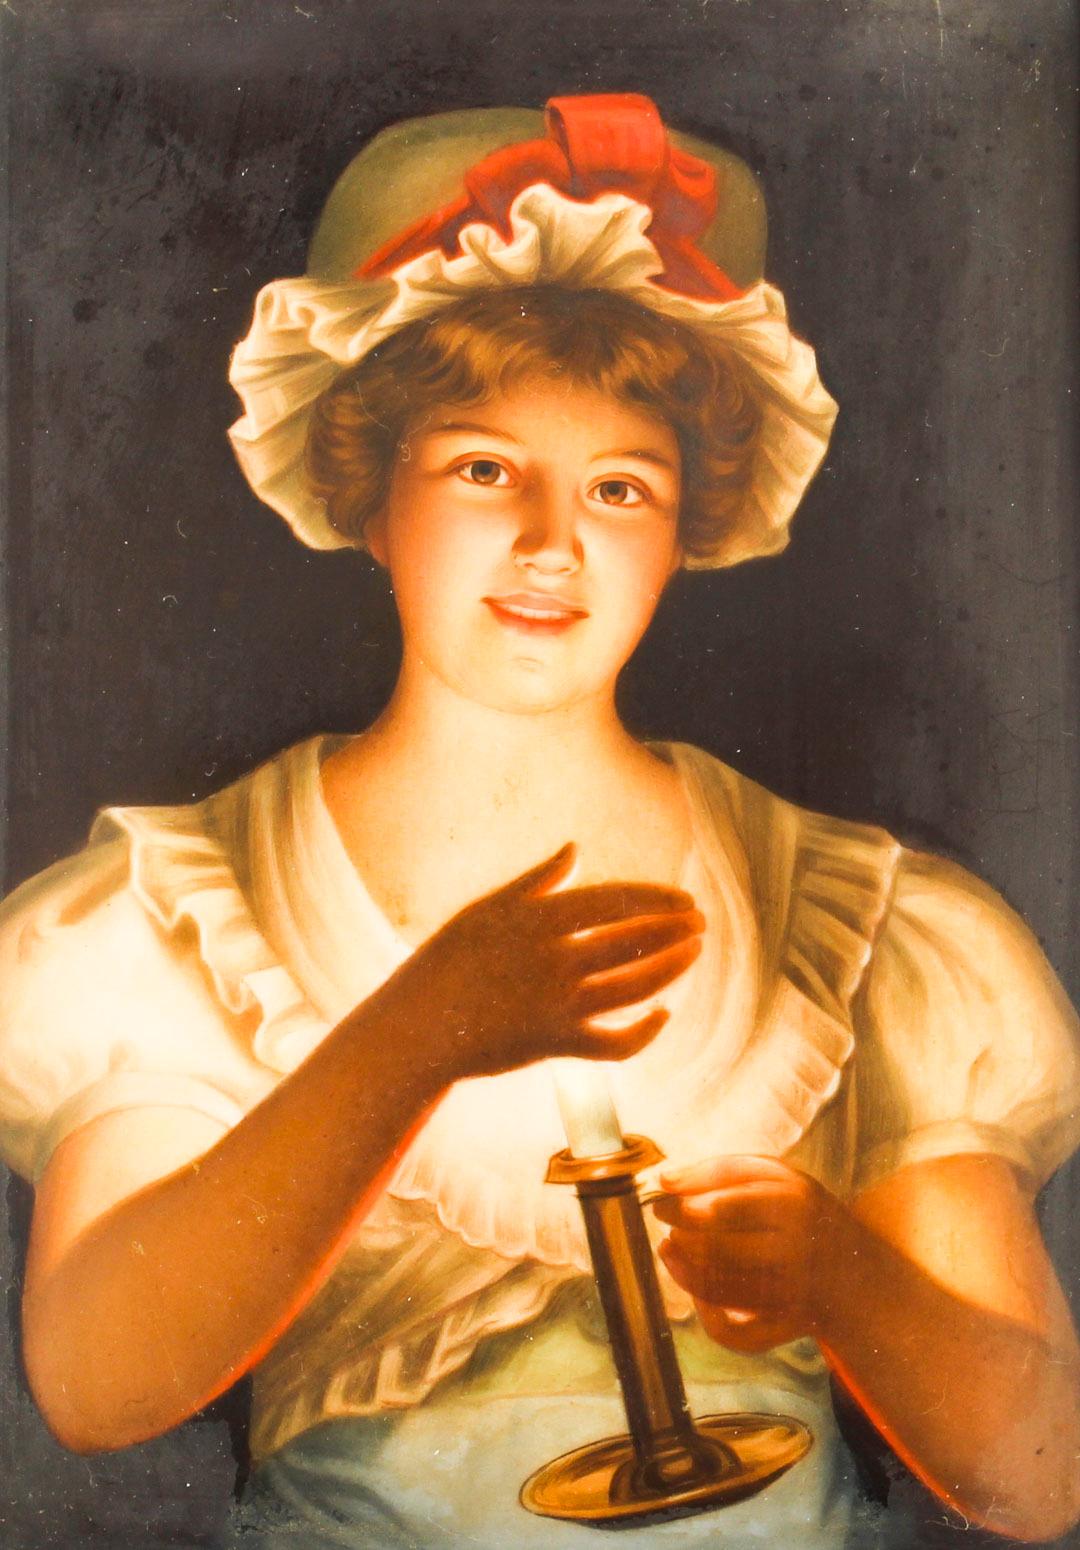 This is a very finely painted Berlin KPM porcelain plaque, circa 1880 in date.

The plaque features a beautiful young lady wearing a white night dress and a green and red cap. She is holding a candle which reflects stunningly in her charming